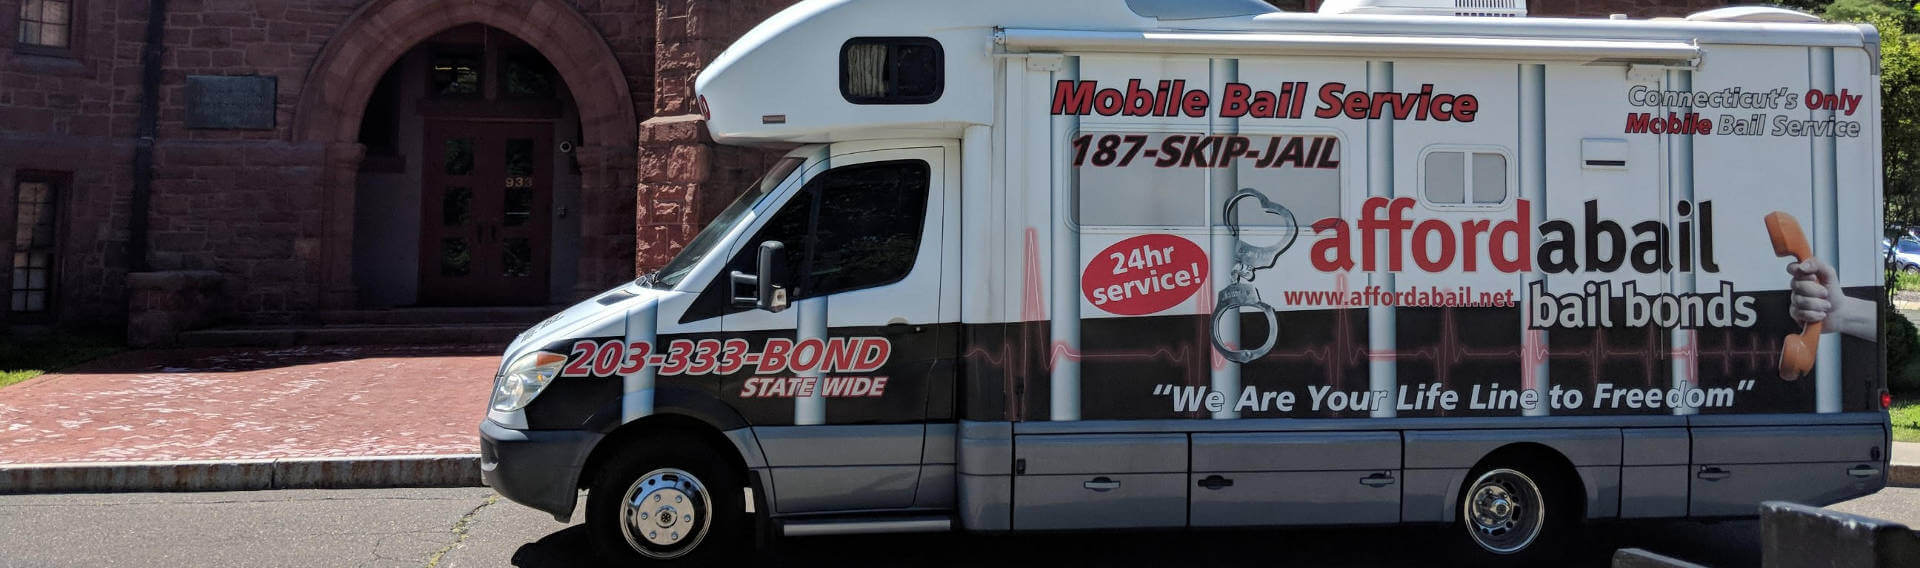 Mobile bail bonds service in Middlefield CT